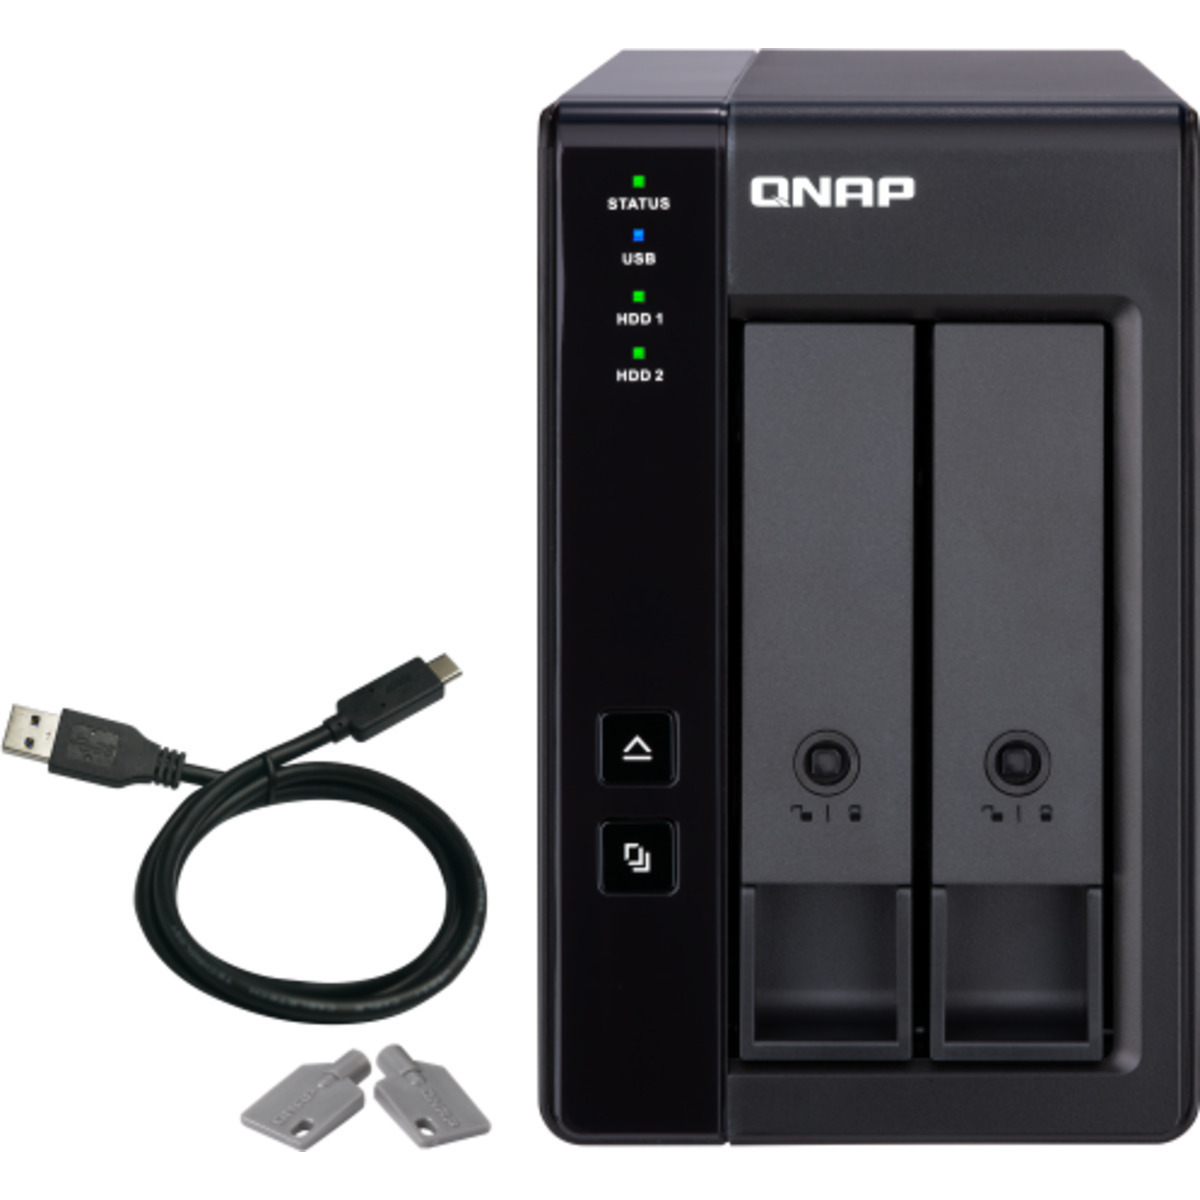 buy QNAP TR-002 External Expansion Drive 8tb Desktop Expansion Enclosure 2x4000gb Toshiba MN Series MN08ADA400E 3.5 7200rpm SATA 6Gb/s HDD NAS Class Drives Installed - Burn-In Tested - ON SALE - nas headquarters buy network attached storage server device das new raid-5 free shipping simply usa christmas holiday black friday cyber monday week sale happening now! TR-002 External Expansion Drive